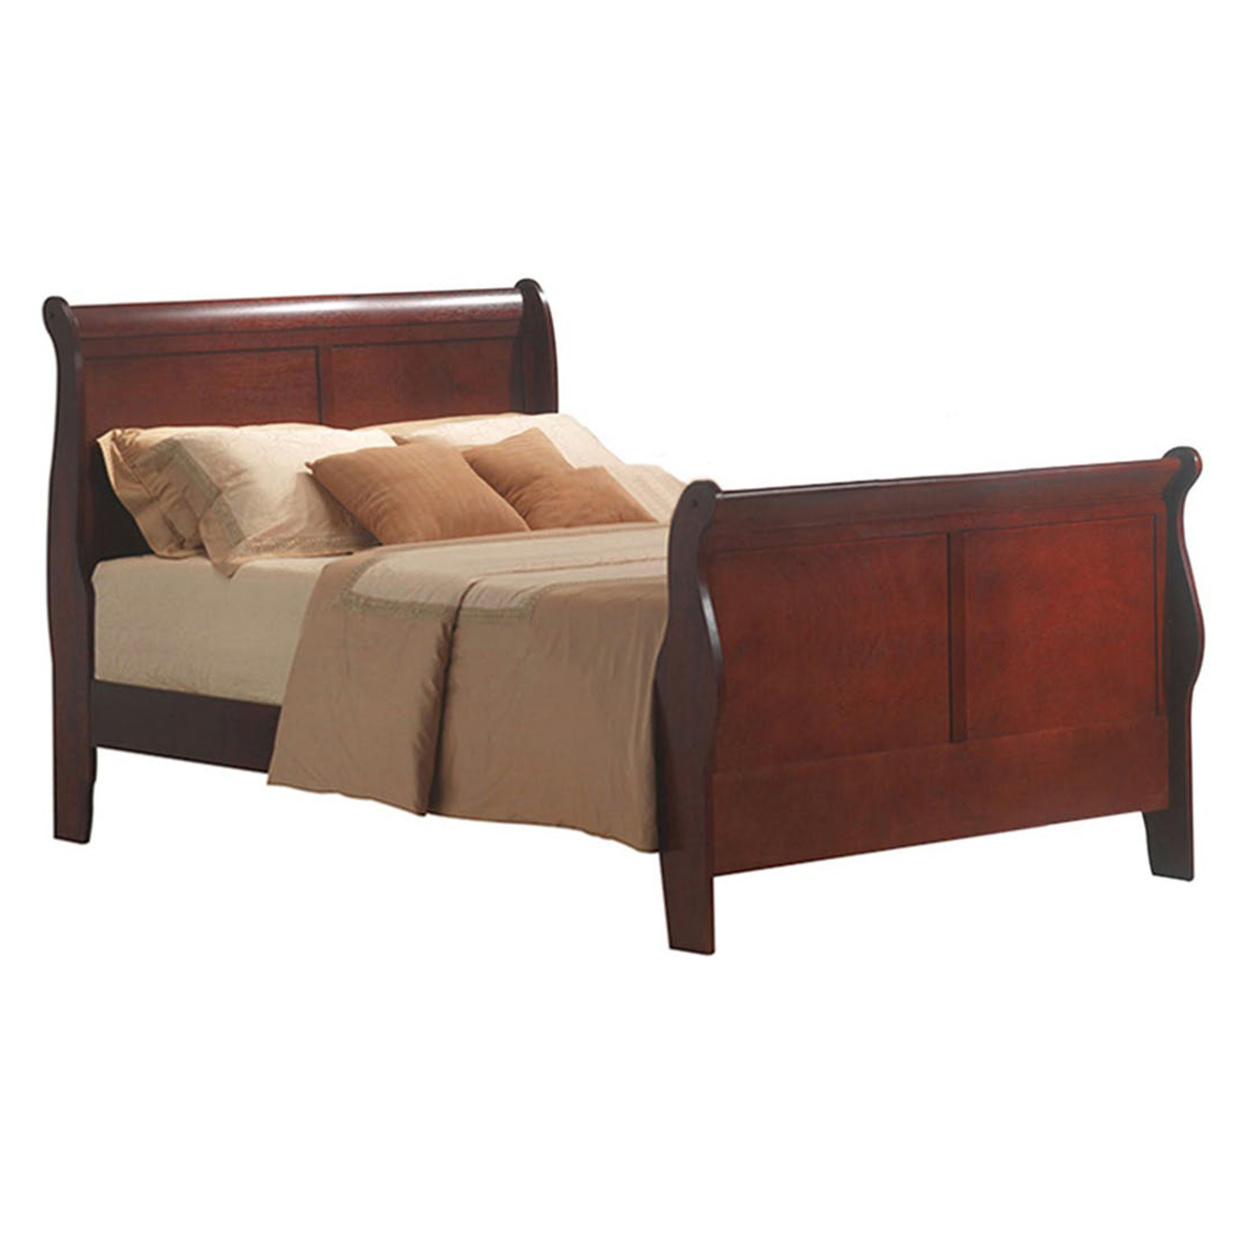 Traditional Style Twin Size Wooden Sleigh Bed, Cherry Brown- Saltoro Sherpi